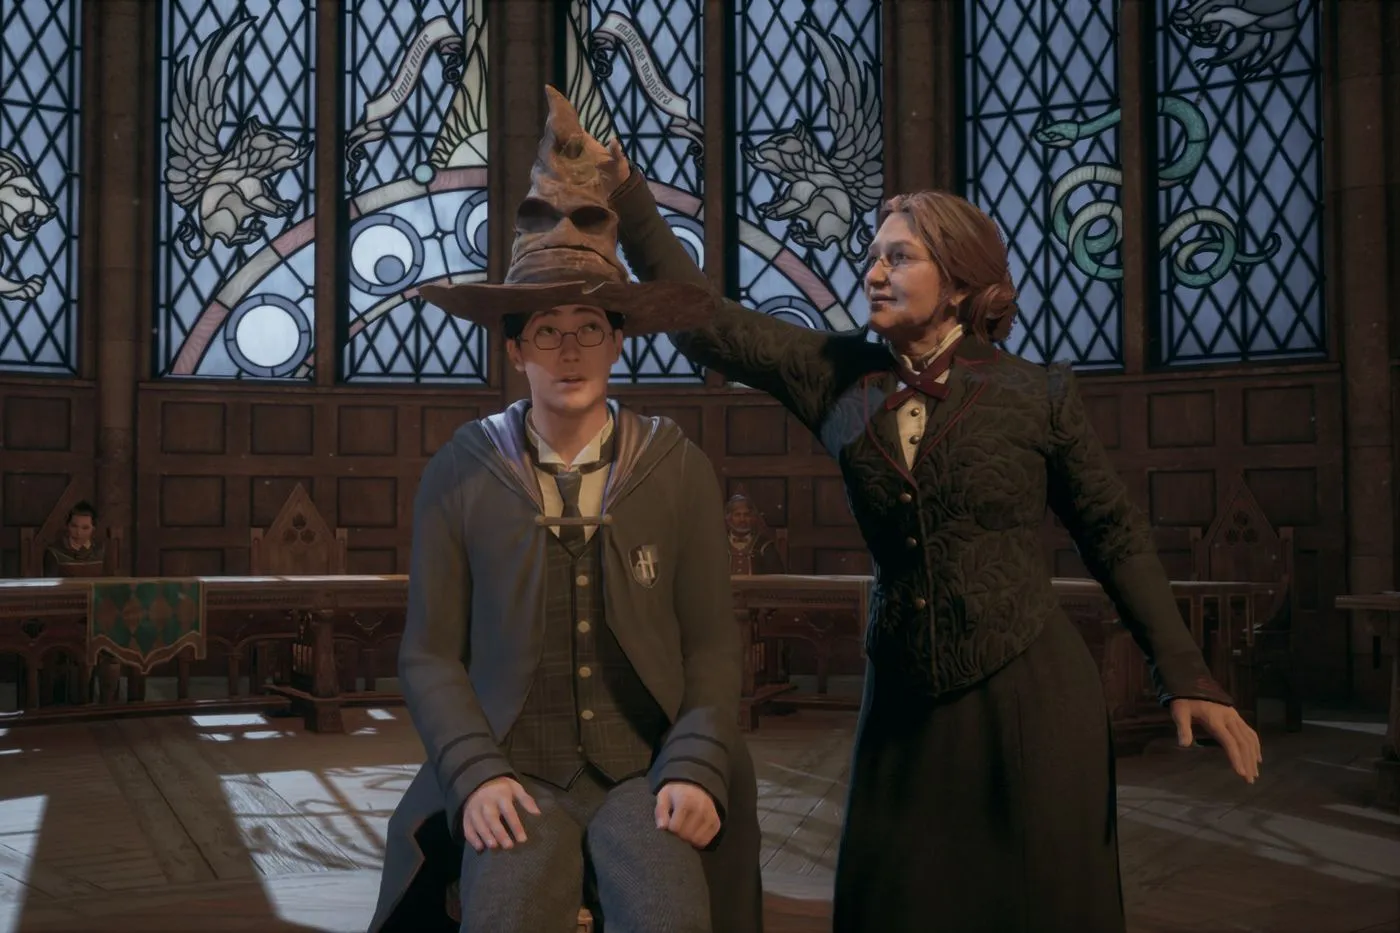 Hogwarts Legacy Switch release date